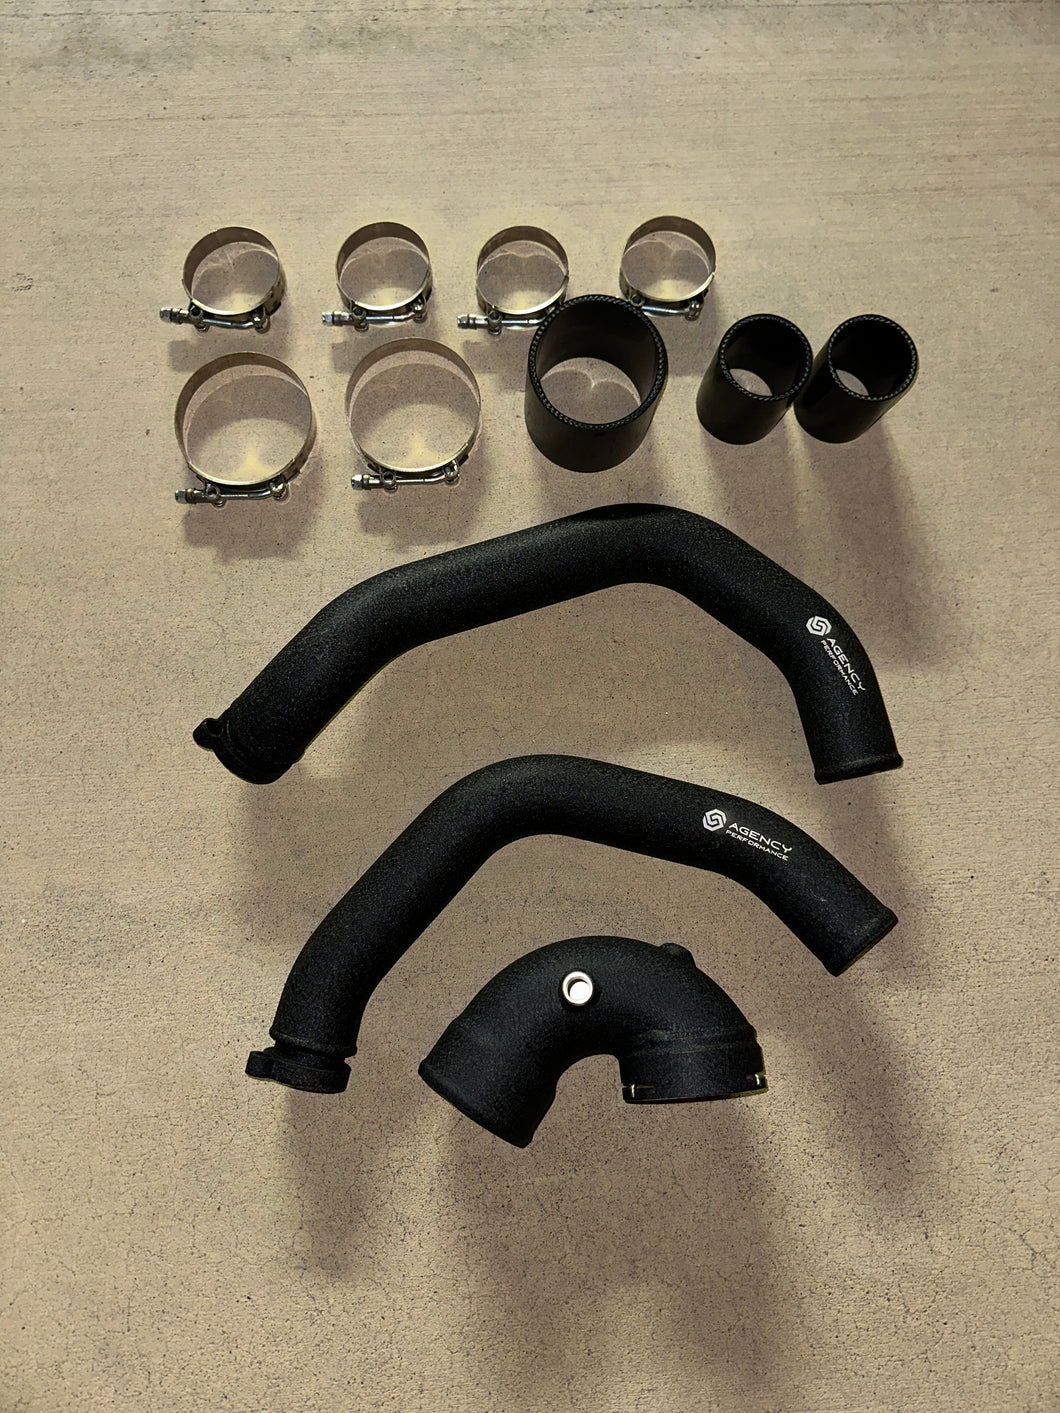 BMW S55 Aluminum Black Charge pipes & J Pipe